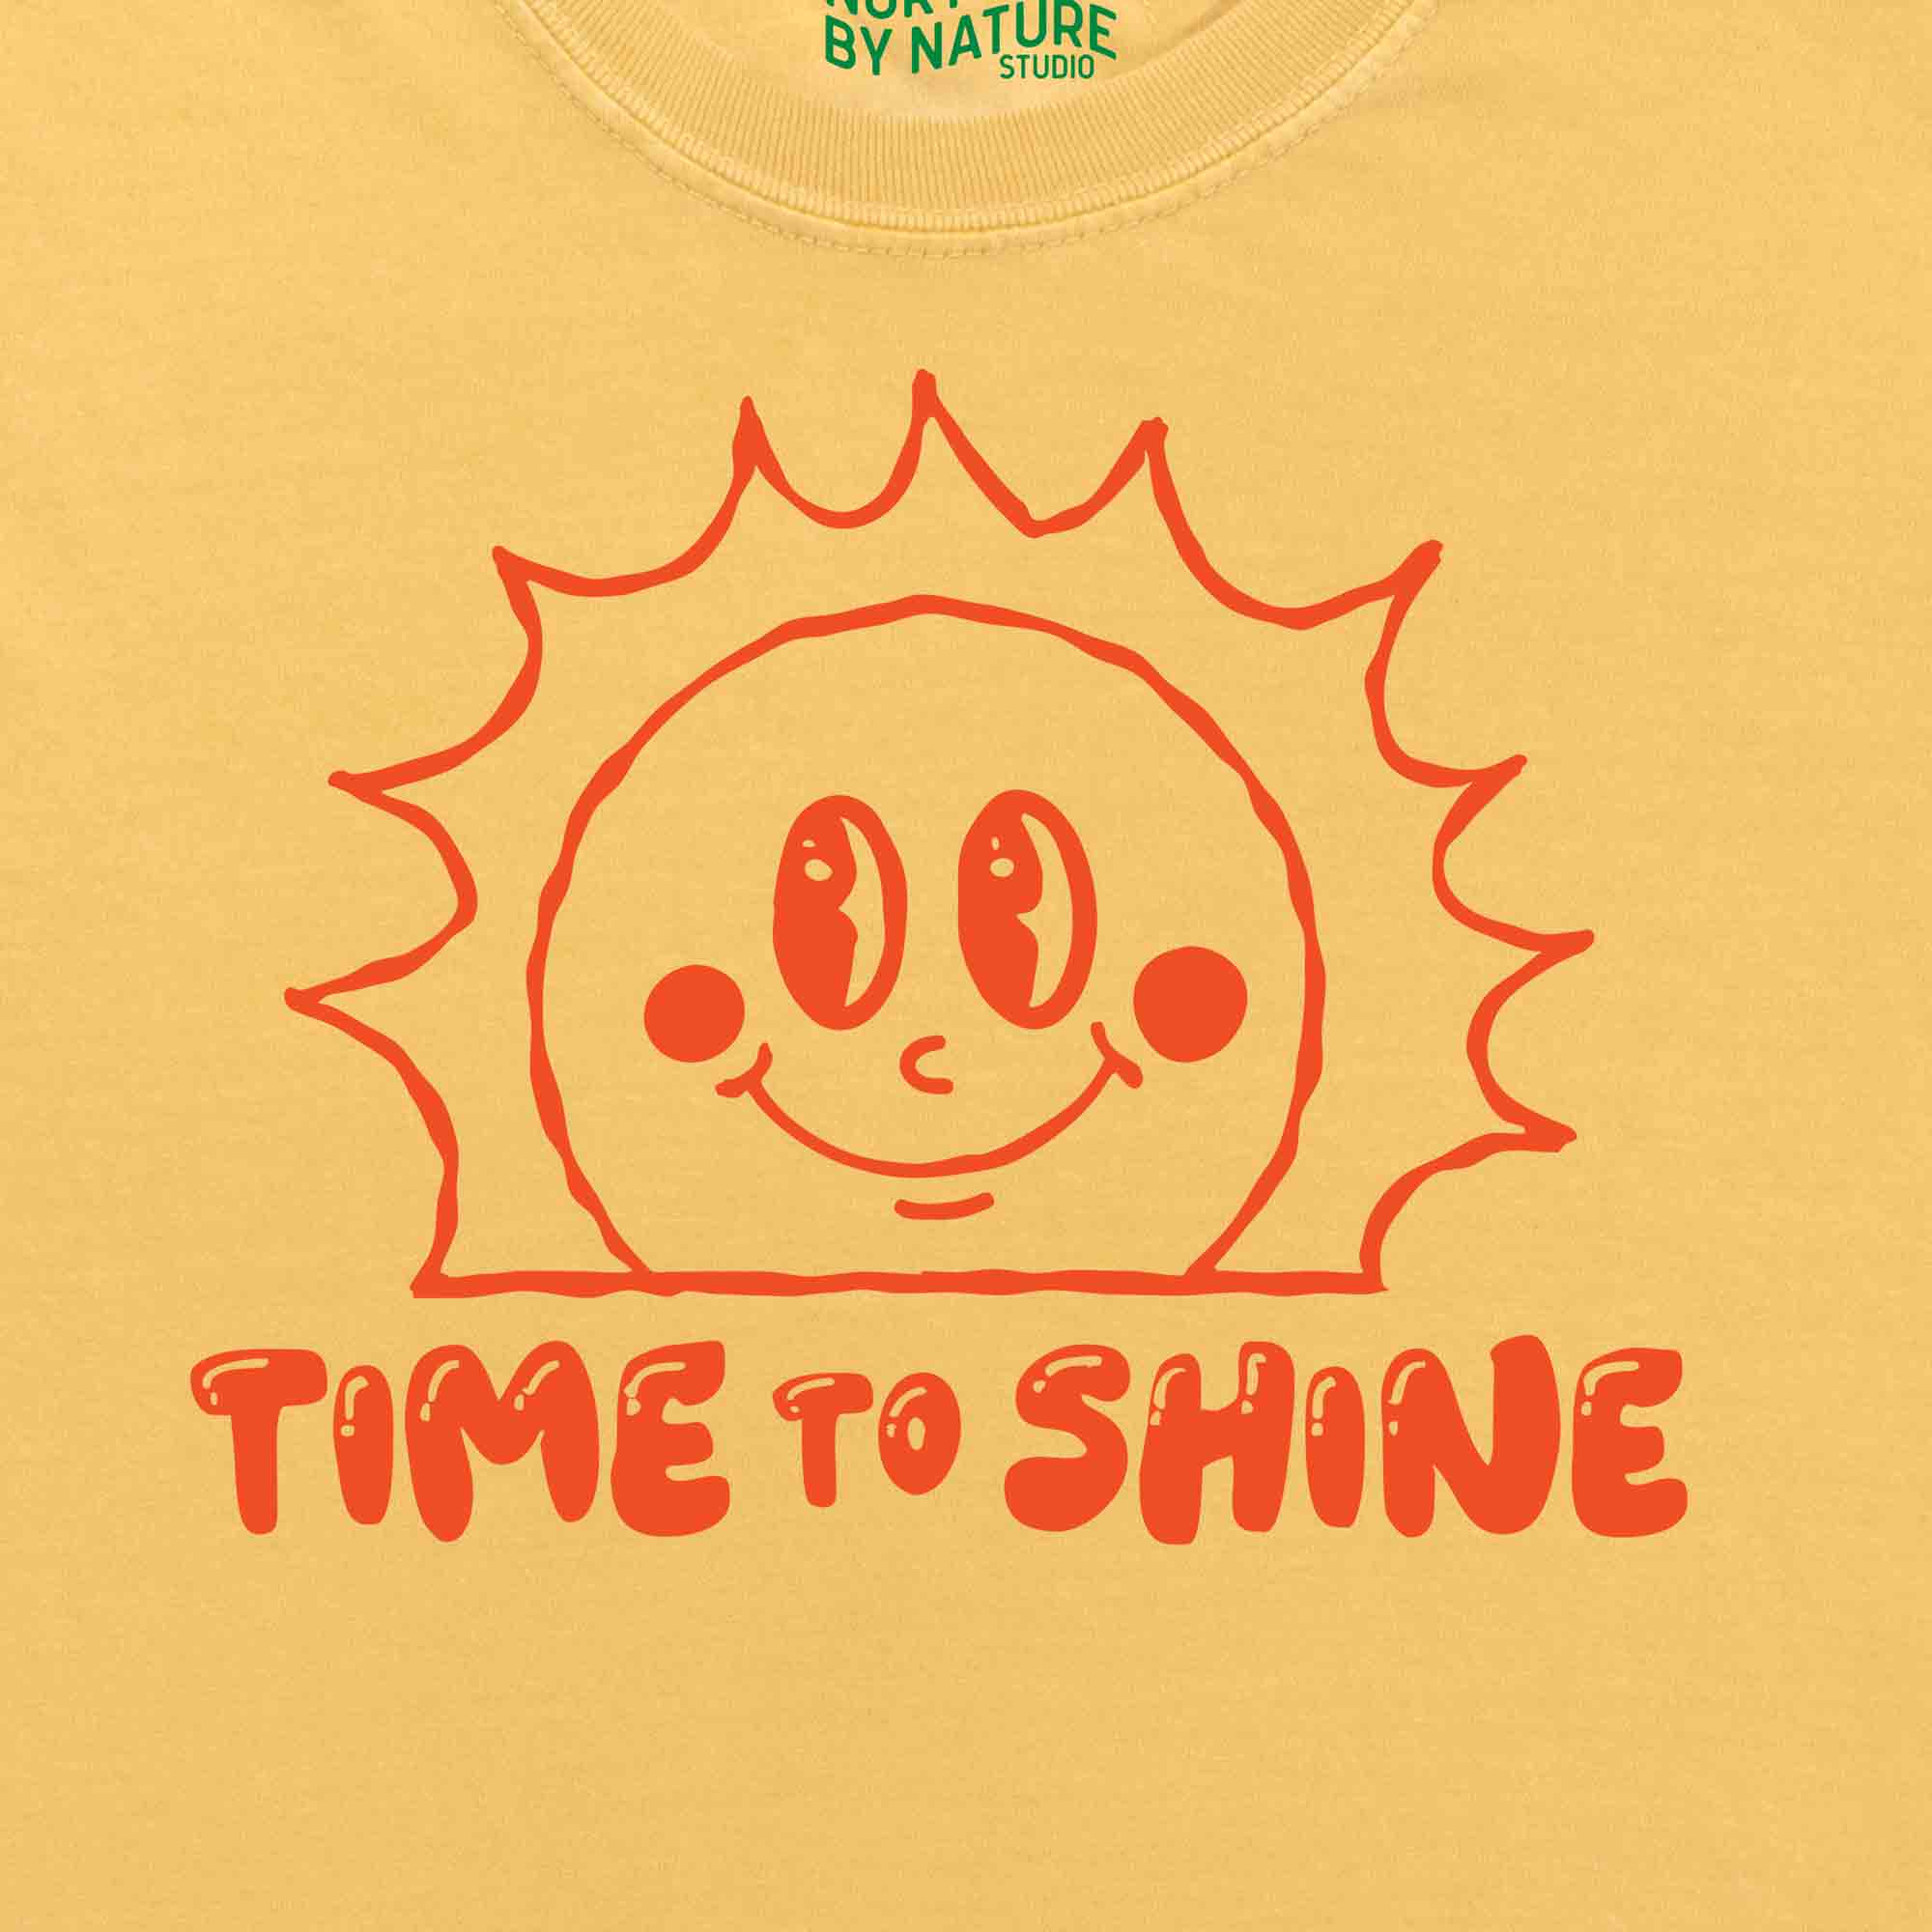 Time to Shine Cute Retro Sun Graphic T-Shirt by Nurtured by Nature Studio